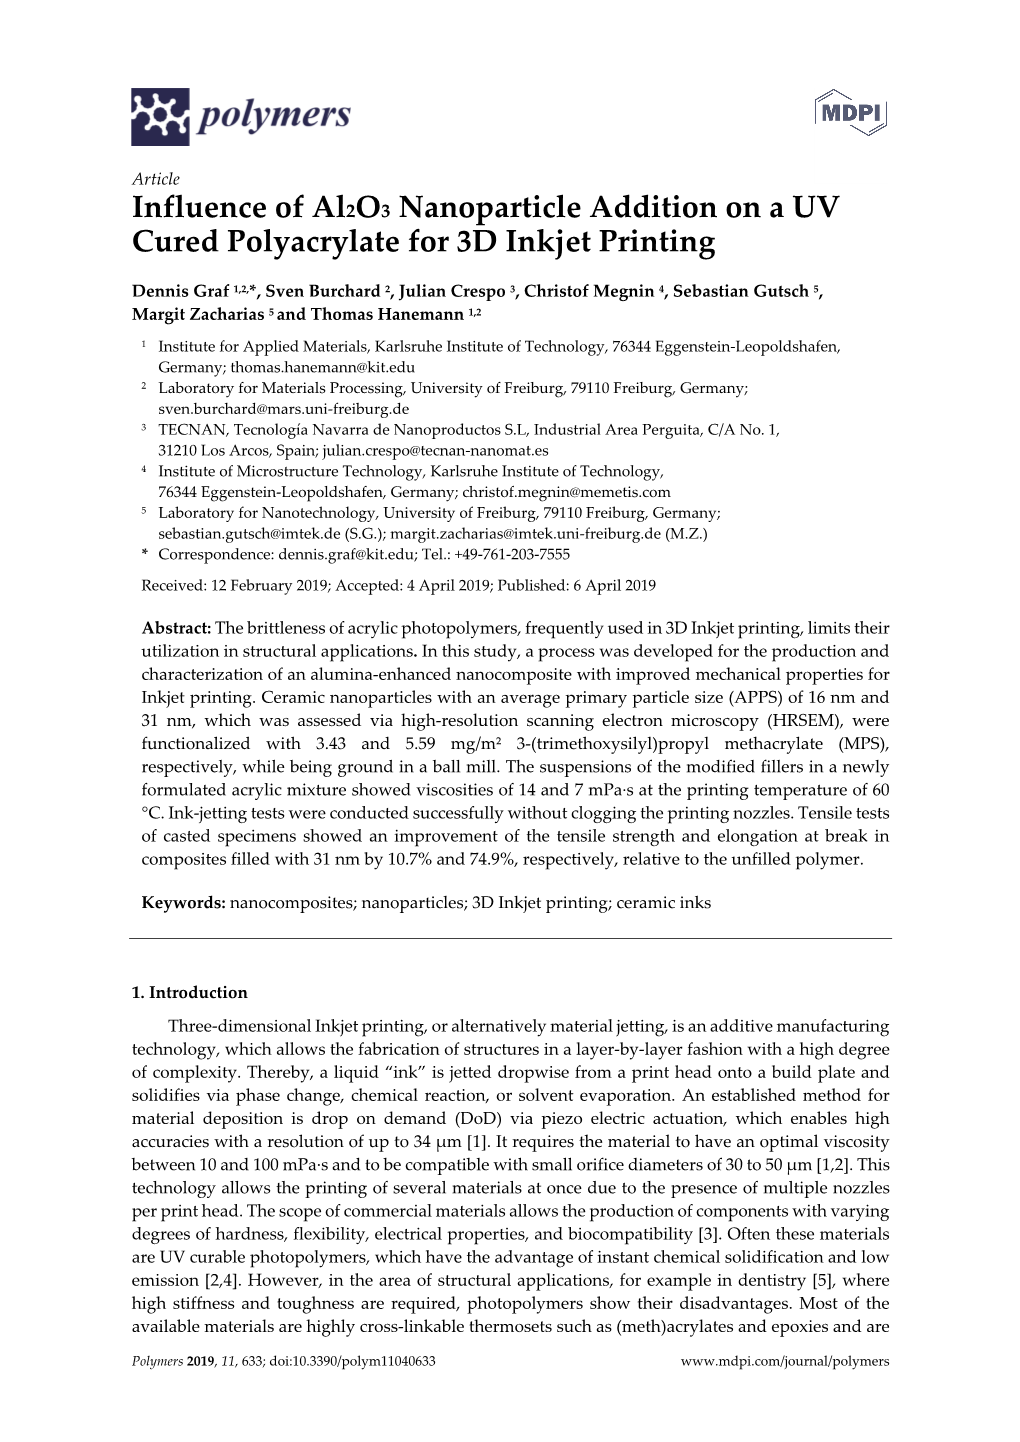 Influence of Al2o3 Nanoparticle Addition on a UV Cured Polyacrylate for 3D Inkjet Printing